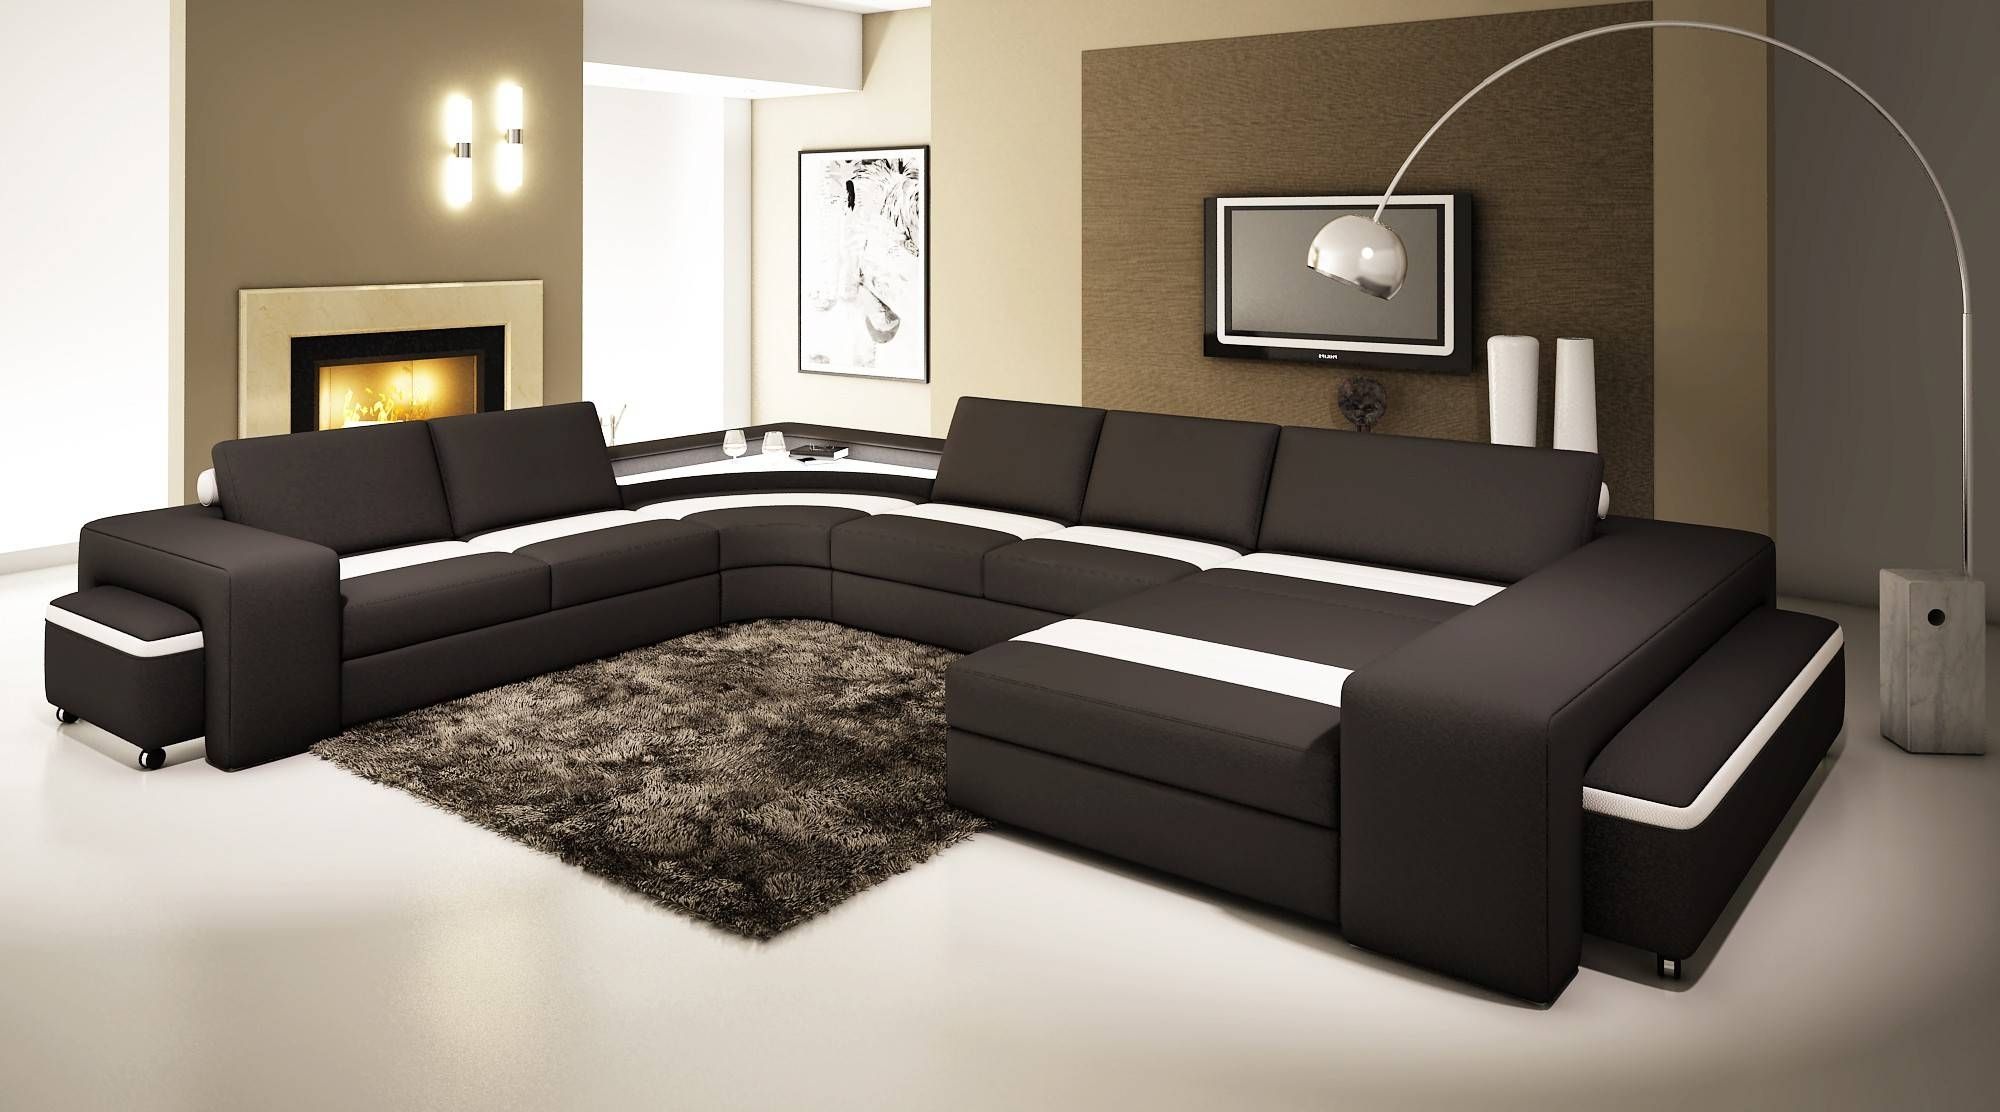 30 Collection of Corner Sofa Bed Sale